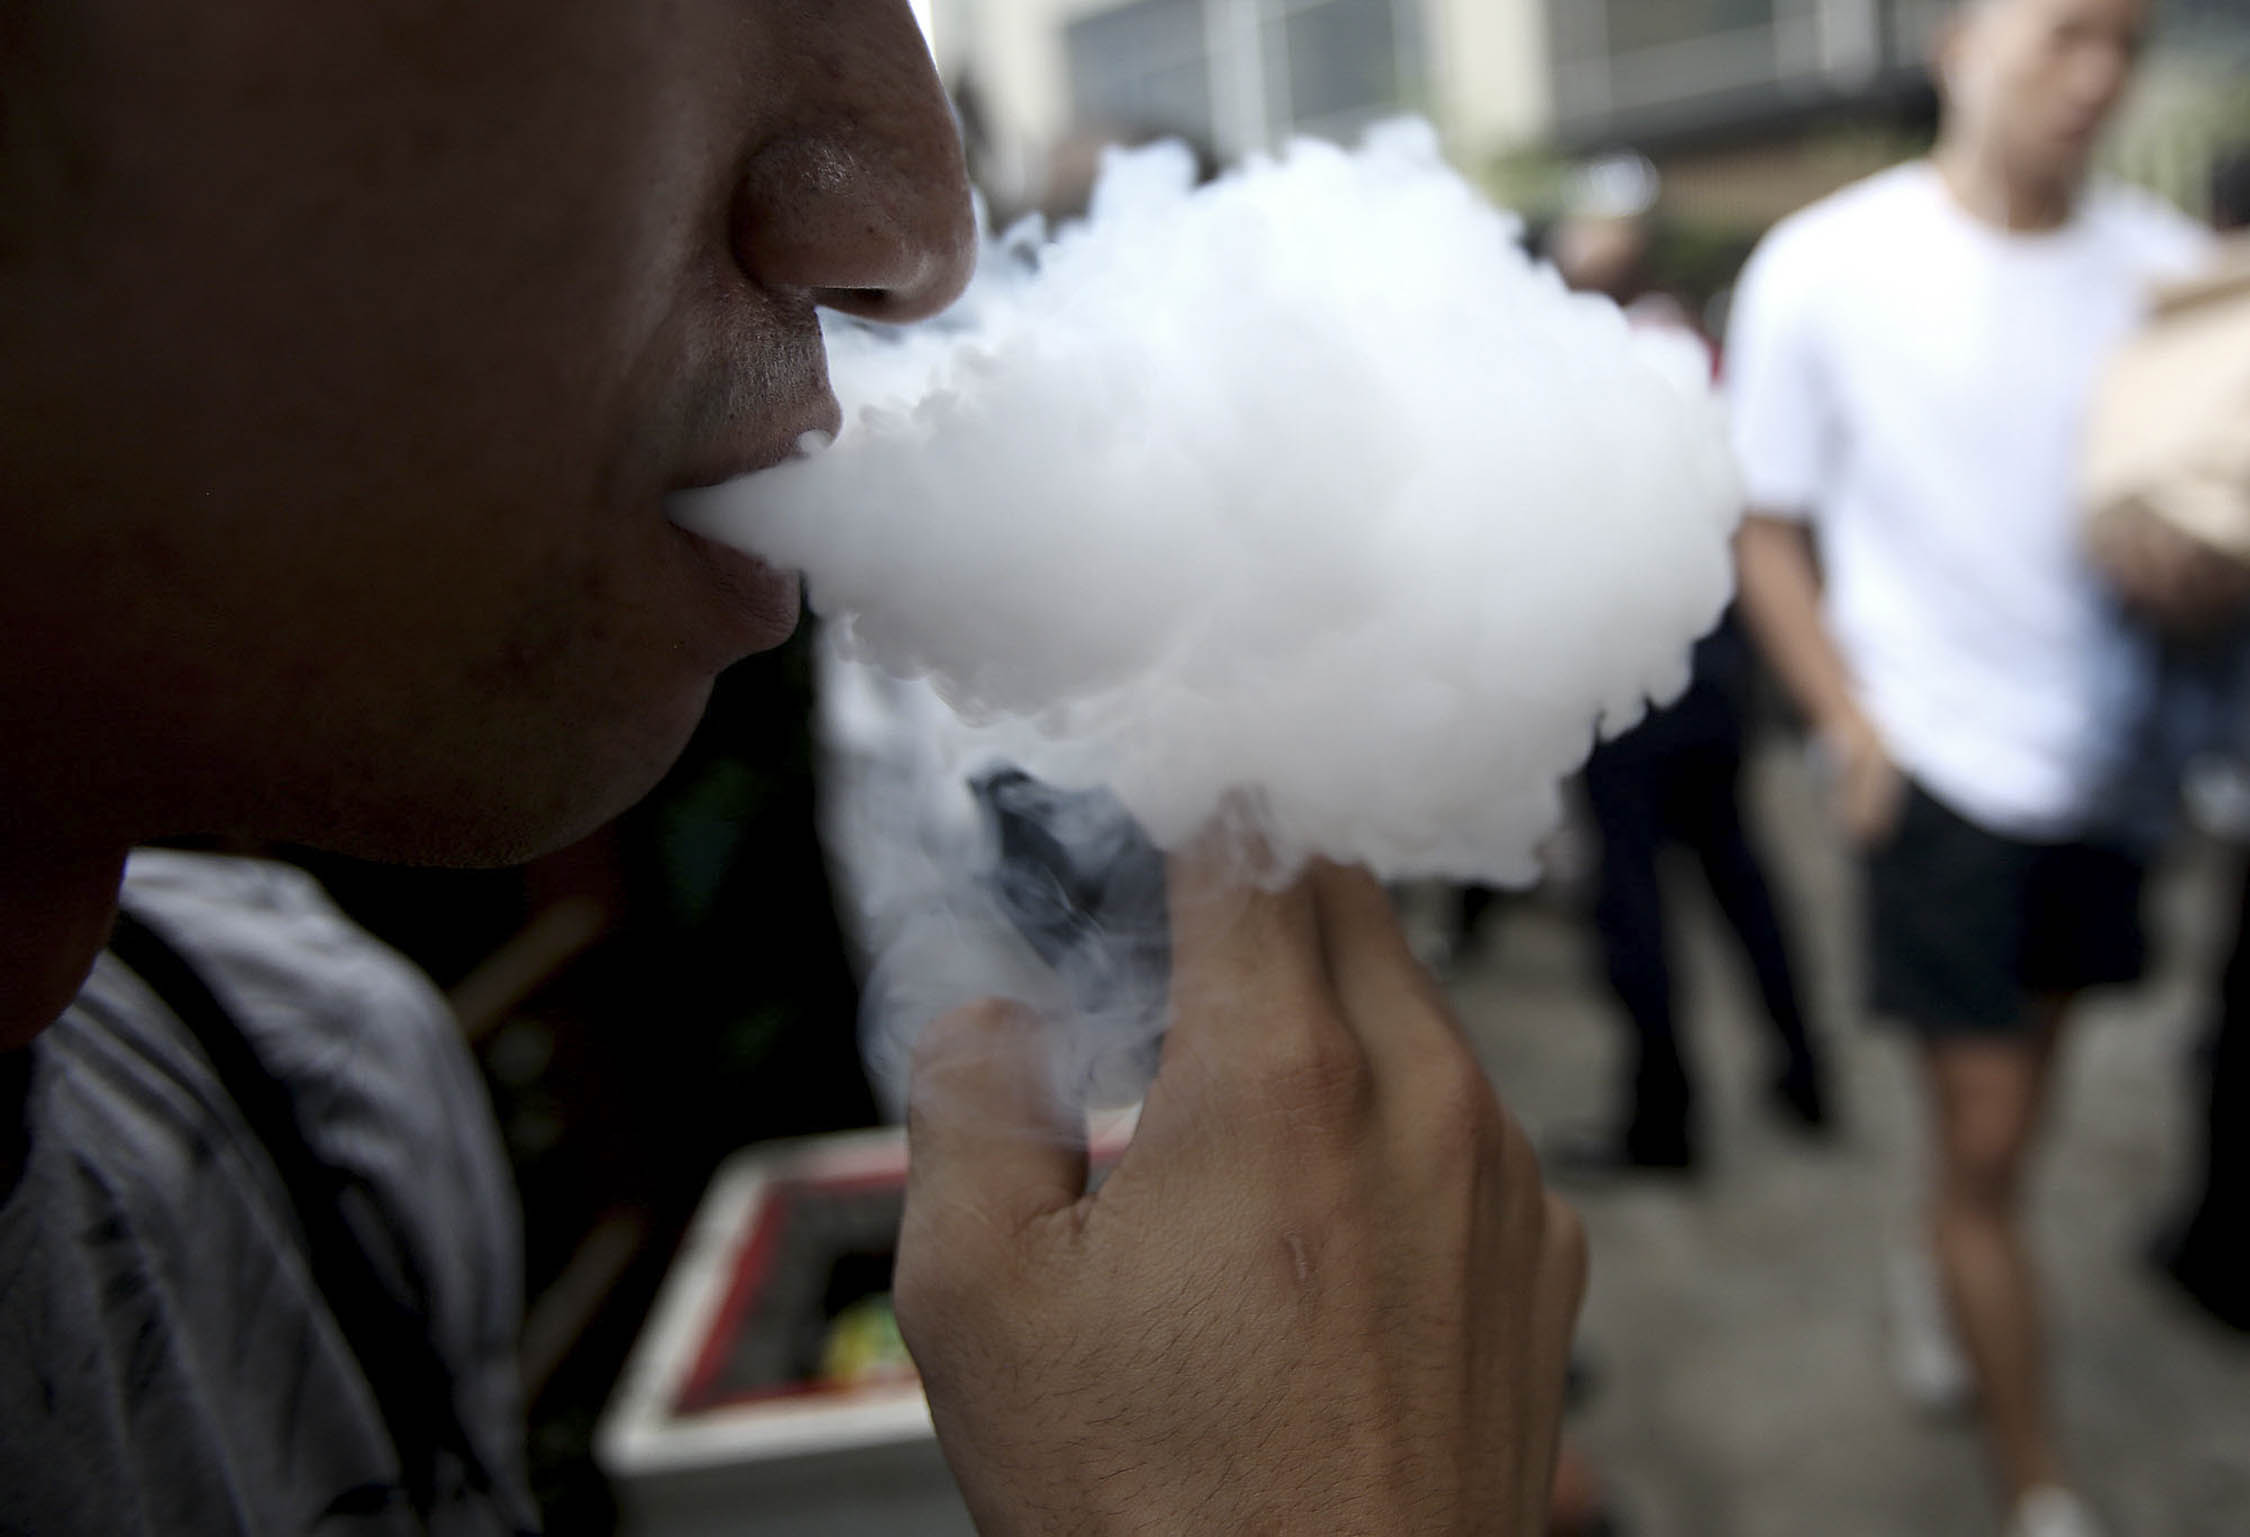 Senate bill bars celebrities, influencers from endorsing vapes, heated tobacco products